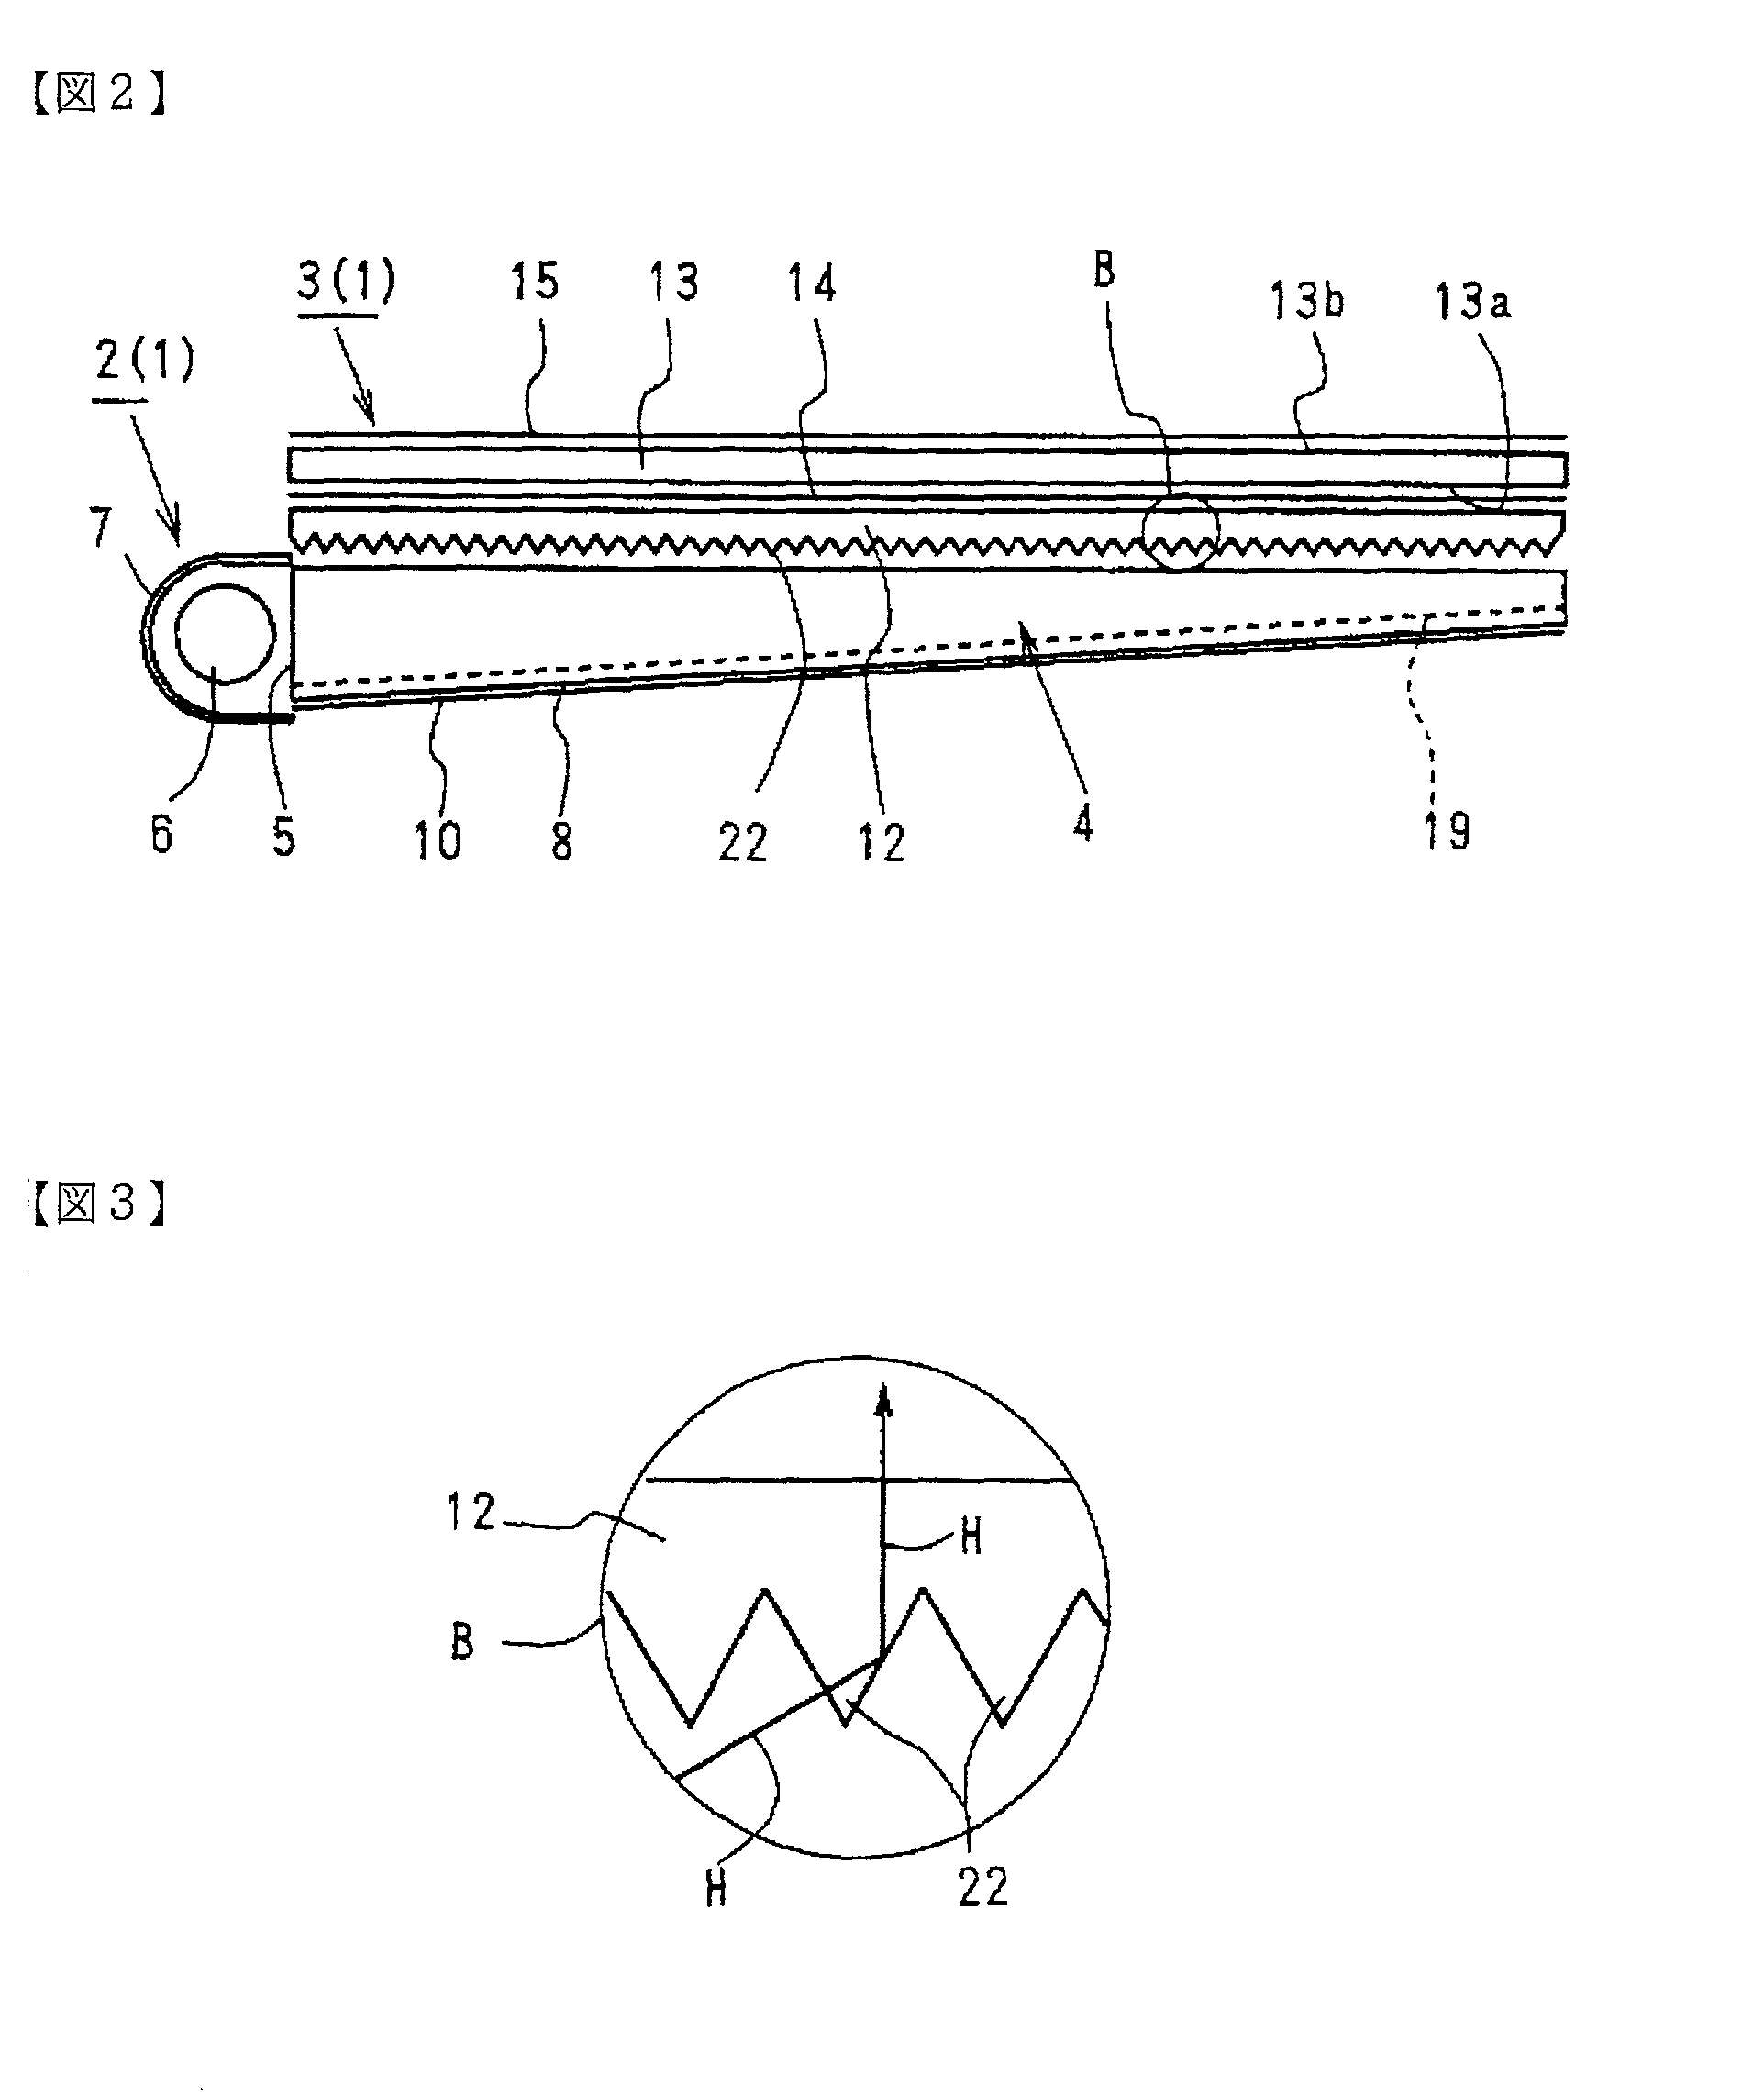 Liquid crystal display, surface light source device and light control sheet